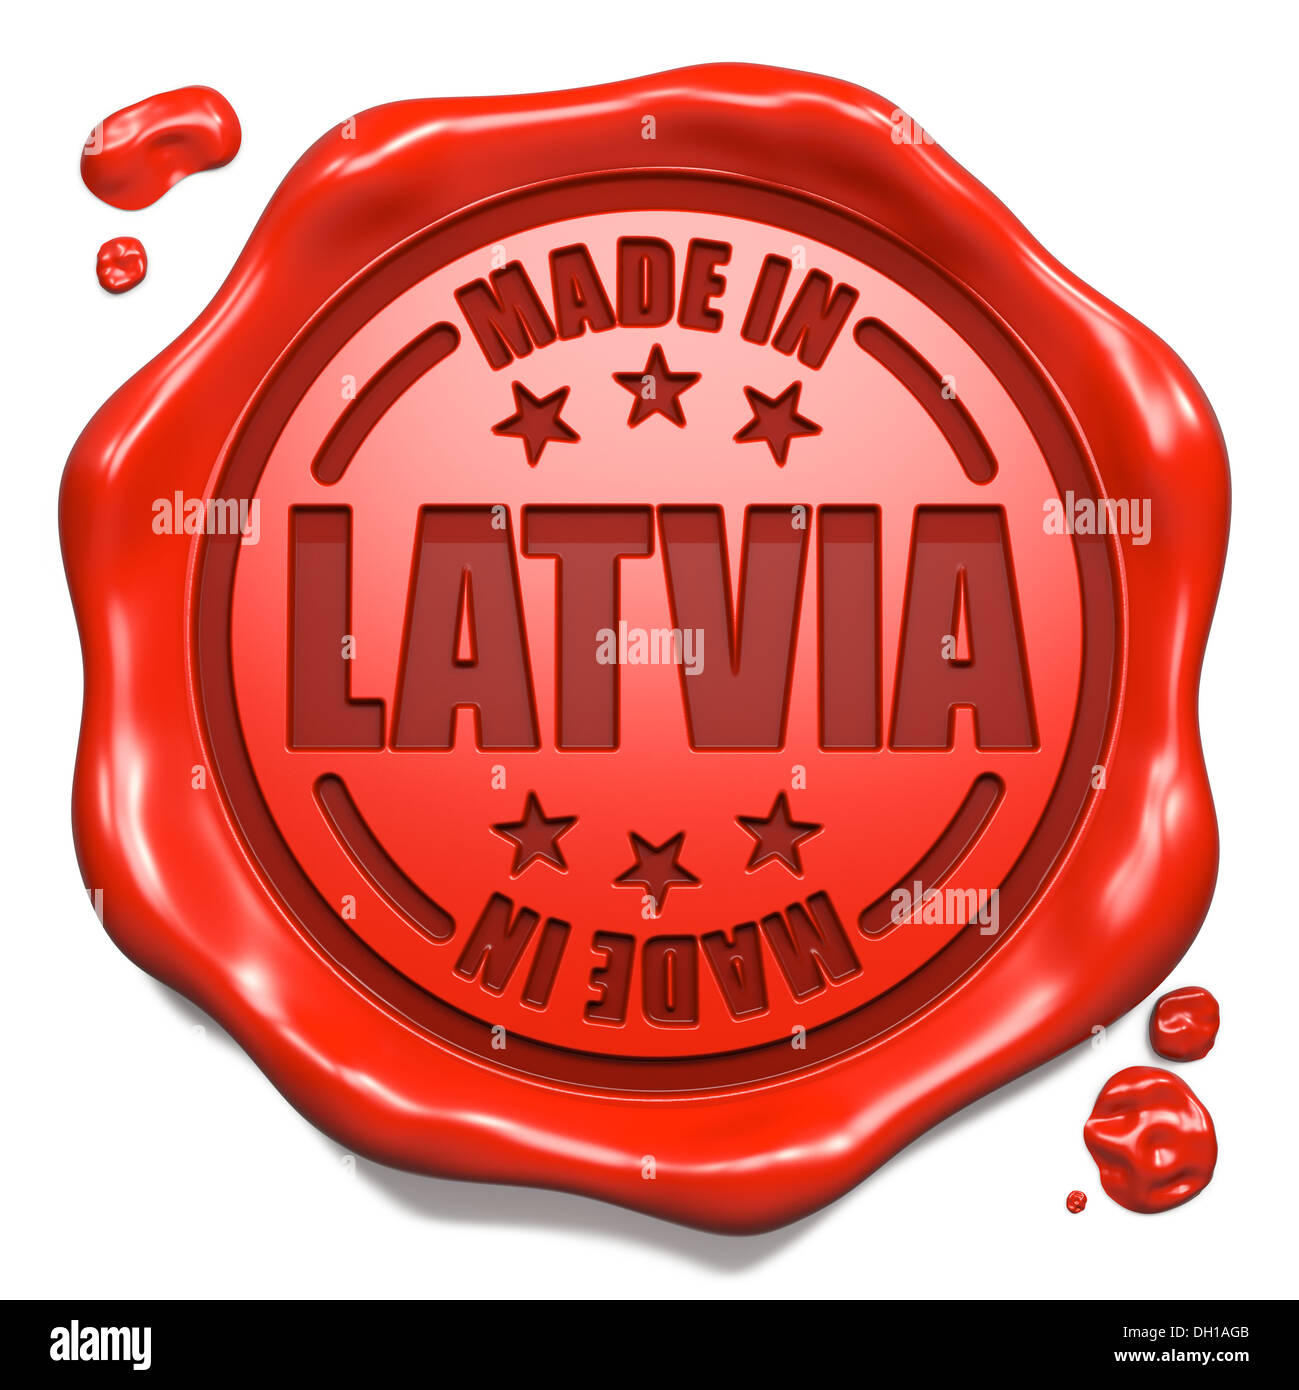 Made in Latvia - Stamp on Red Wax Seal. Stock Photo